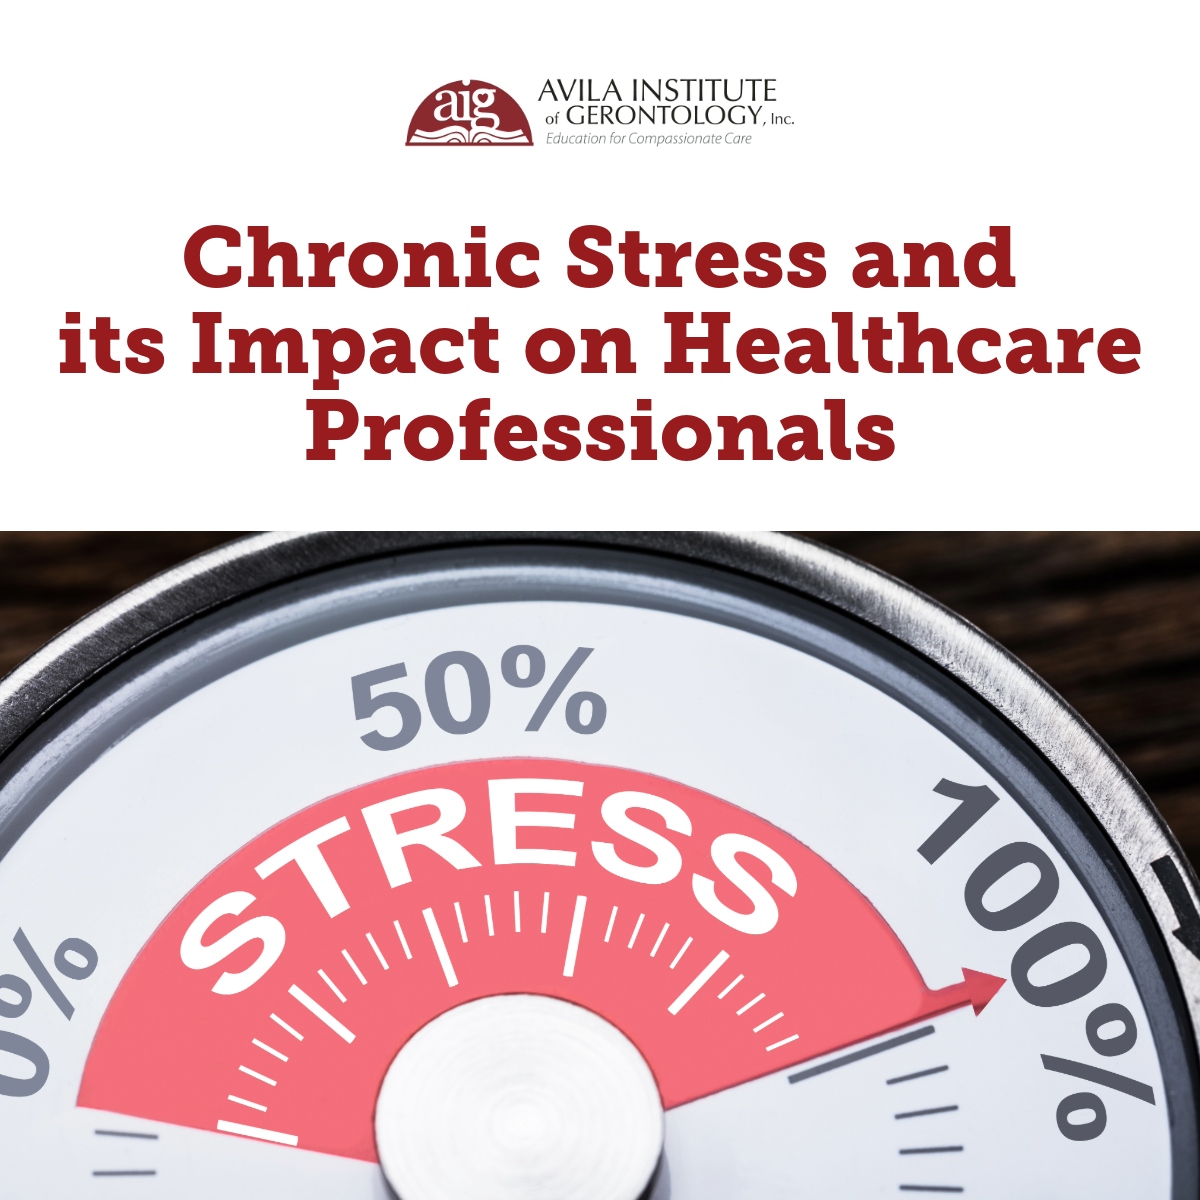 Chronic Stress and its Impact on Healthcare Professionals